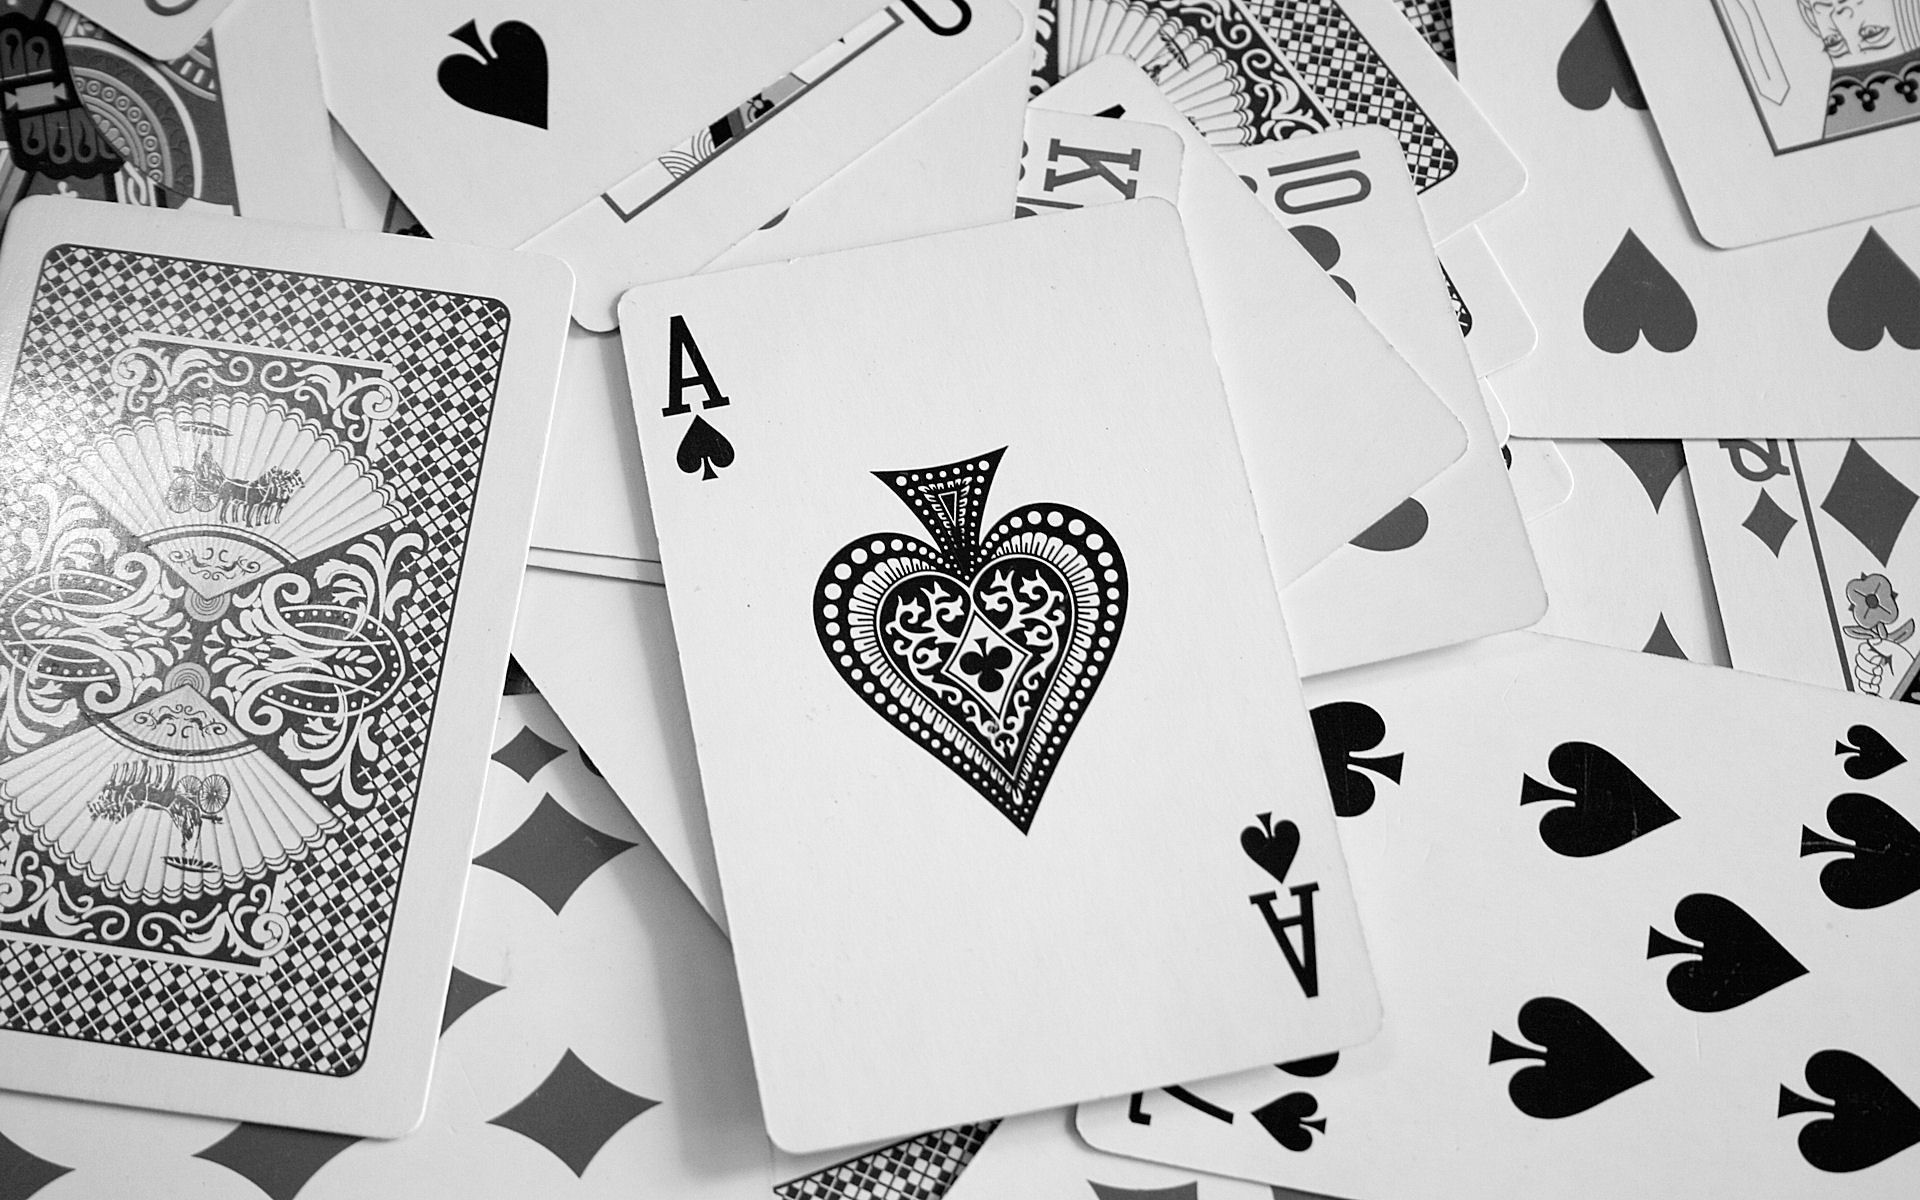 Ace Cards Karty Pik Poker Wallpaper Allwallpaper In 14781 Pc En Check out this fantastic collection of kurapika wallpapers, with 49 kurapika background images for your desktop, phone or tablet. ace cards karty pik poker wallpaper